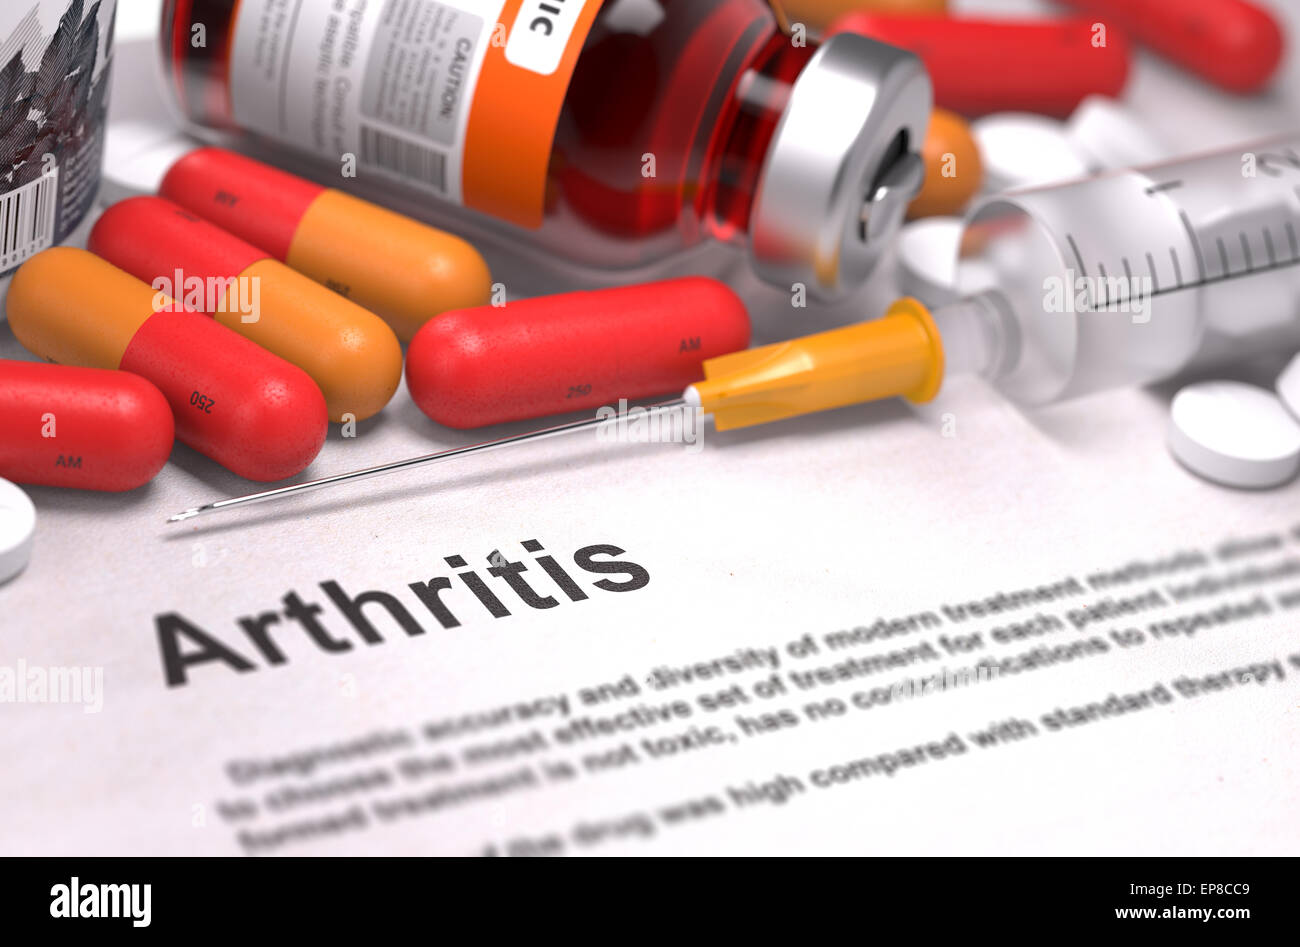 Diagnosis - Arthritis. Medical Report with Composition of Medicaments - Red Pills, Injections and Syringe. Selective Focus. Stock Photo